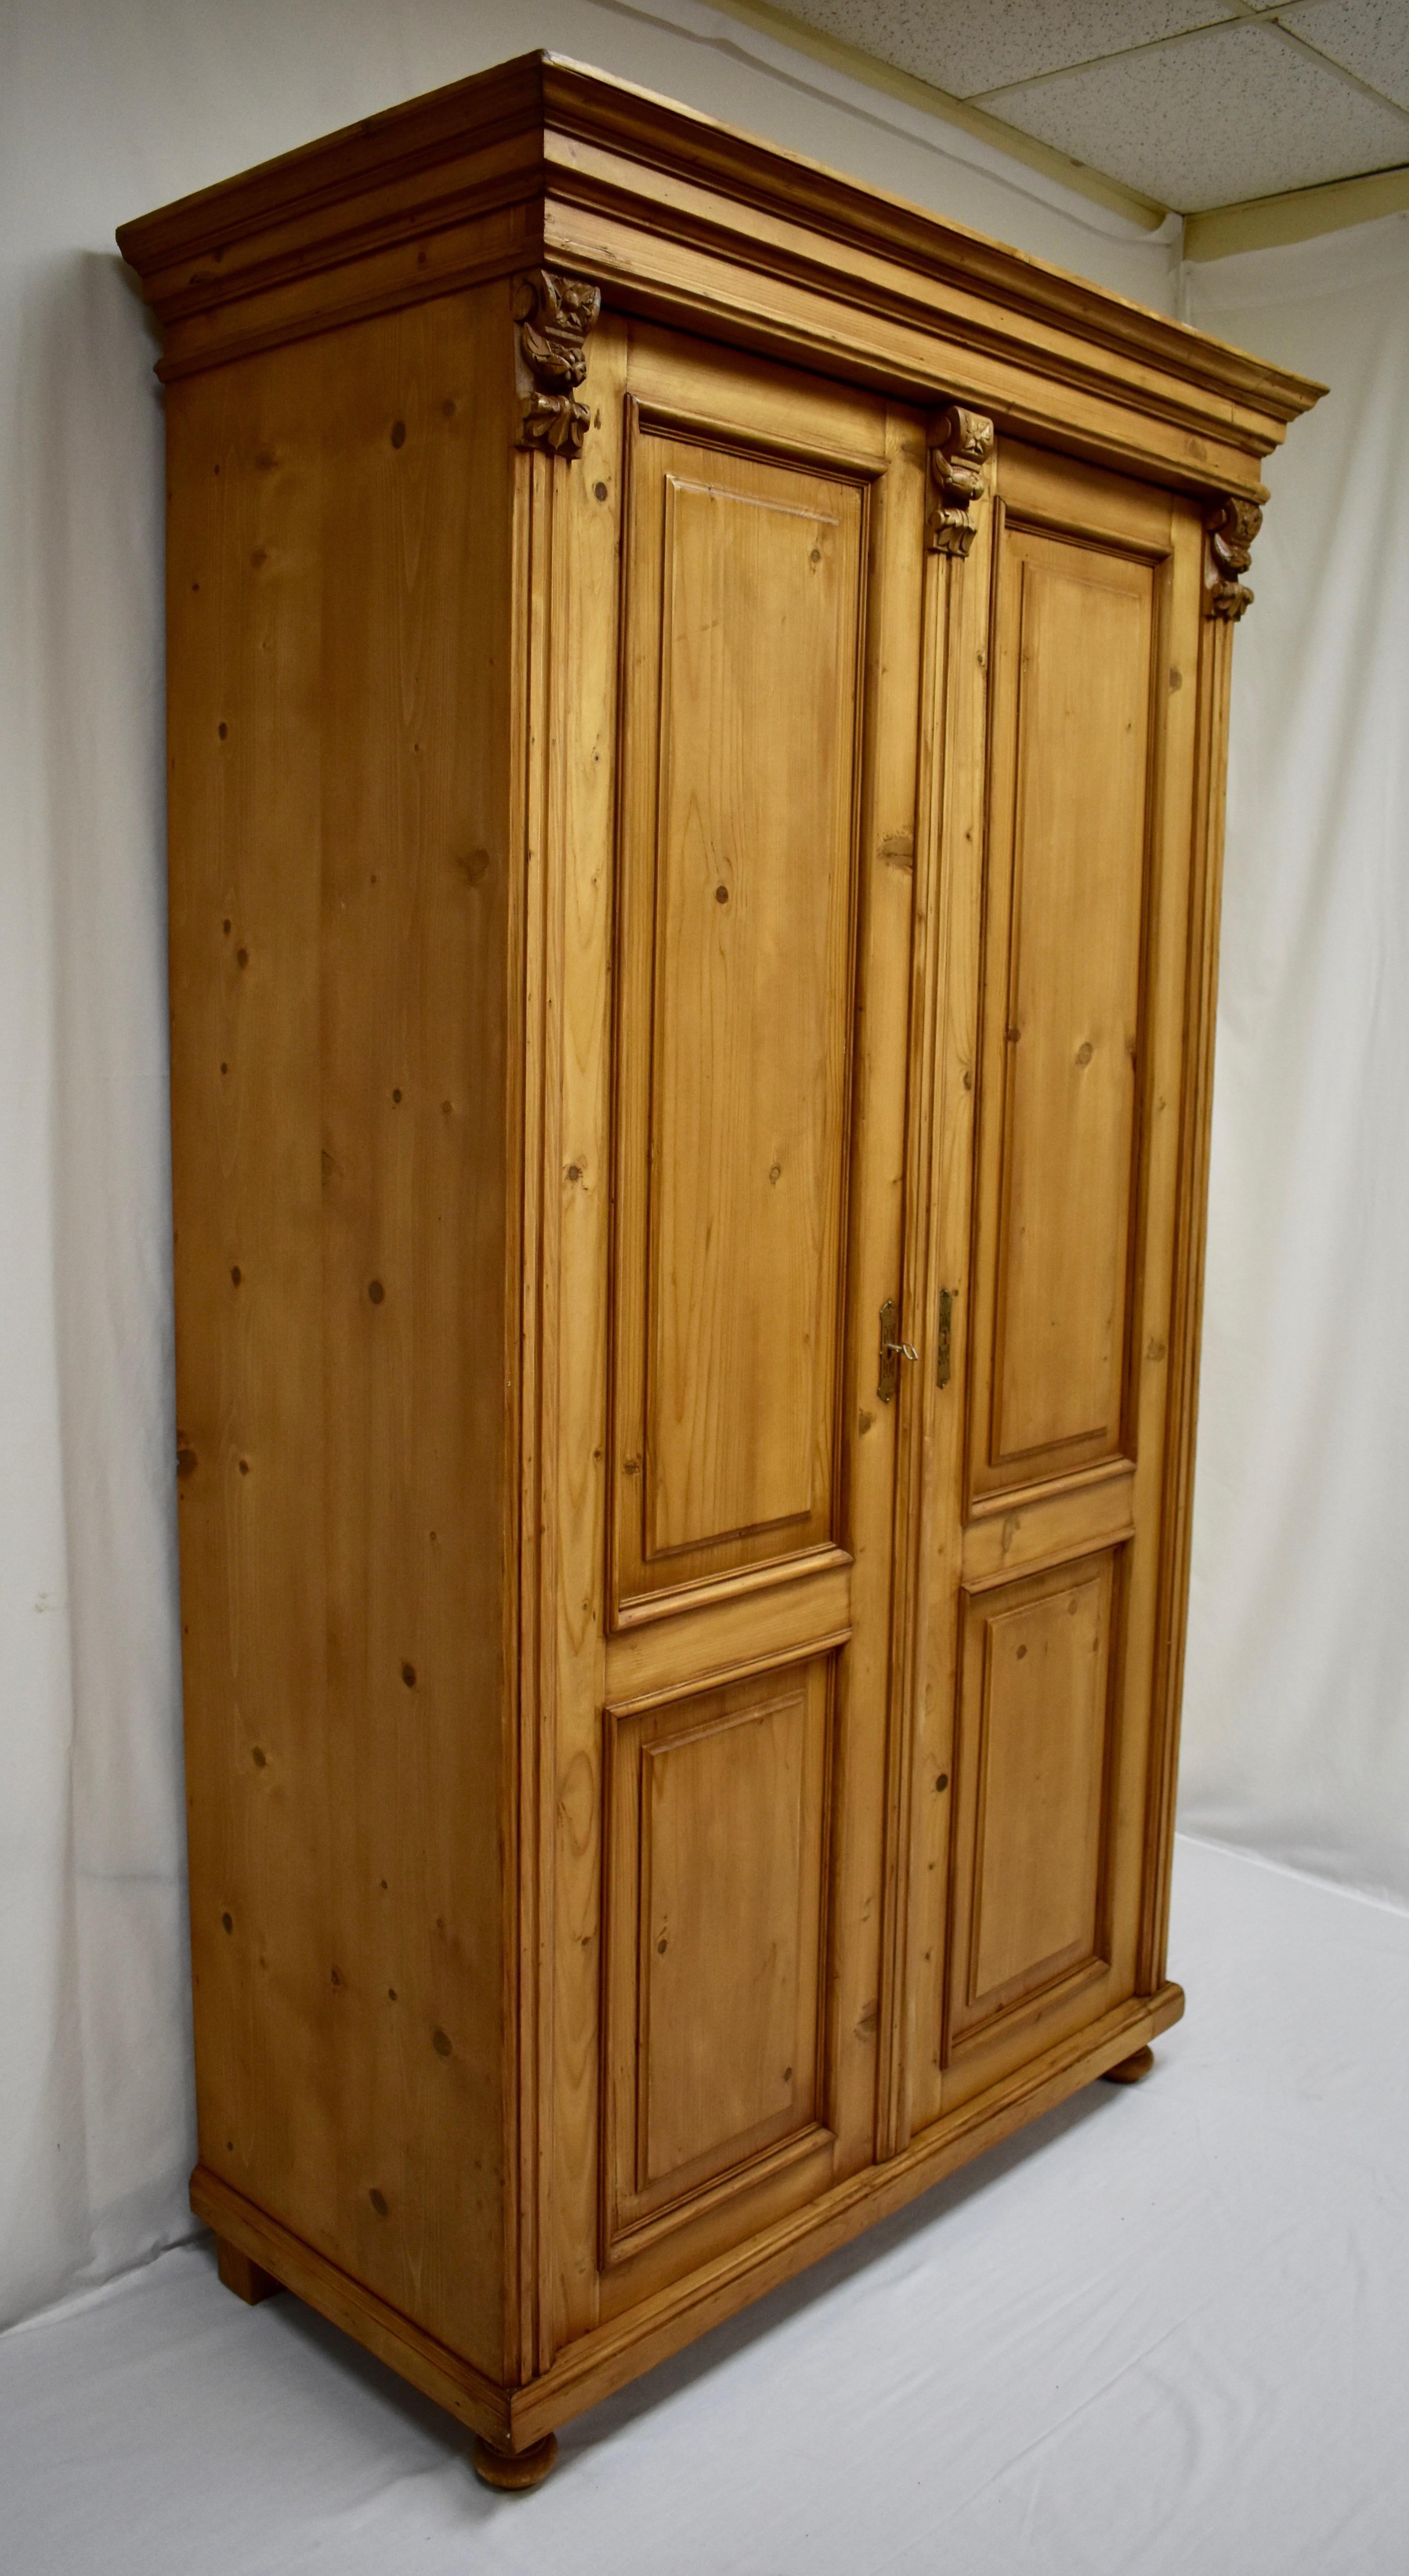 This is a very attractive tall and handsome pine armoire. Beneath a bold crown molding are two doors, each with two raised panels. These are flanked and separated by convex fluted molding mounted by very elaborate fruitwood corbels. At some point a